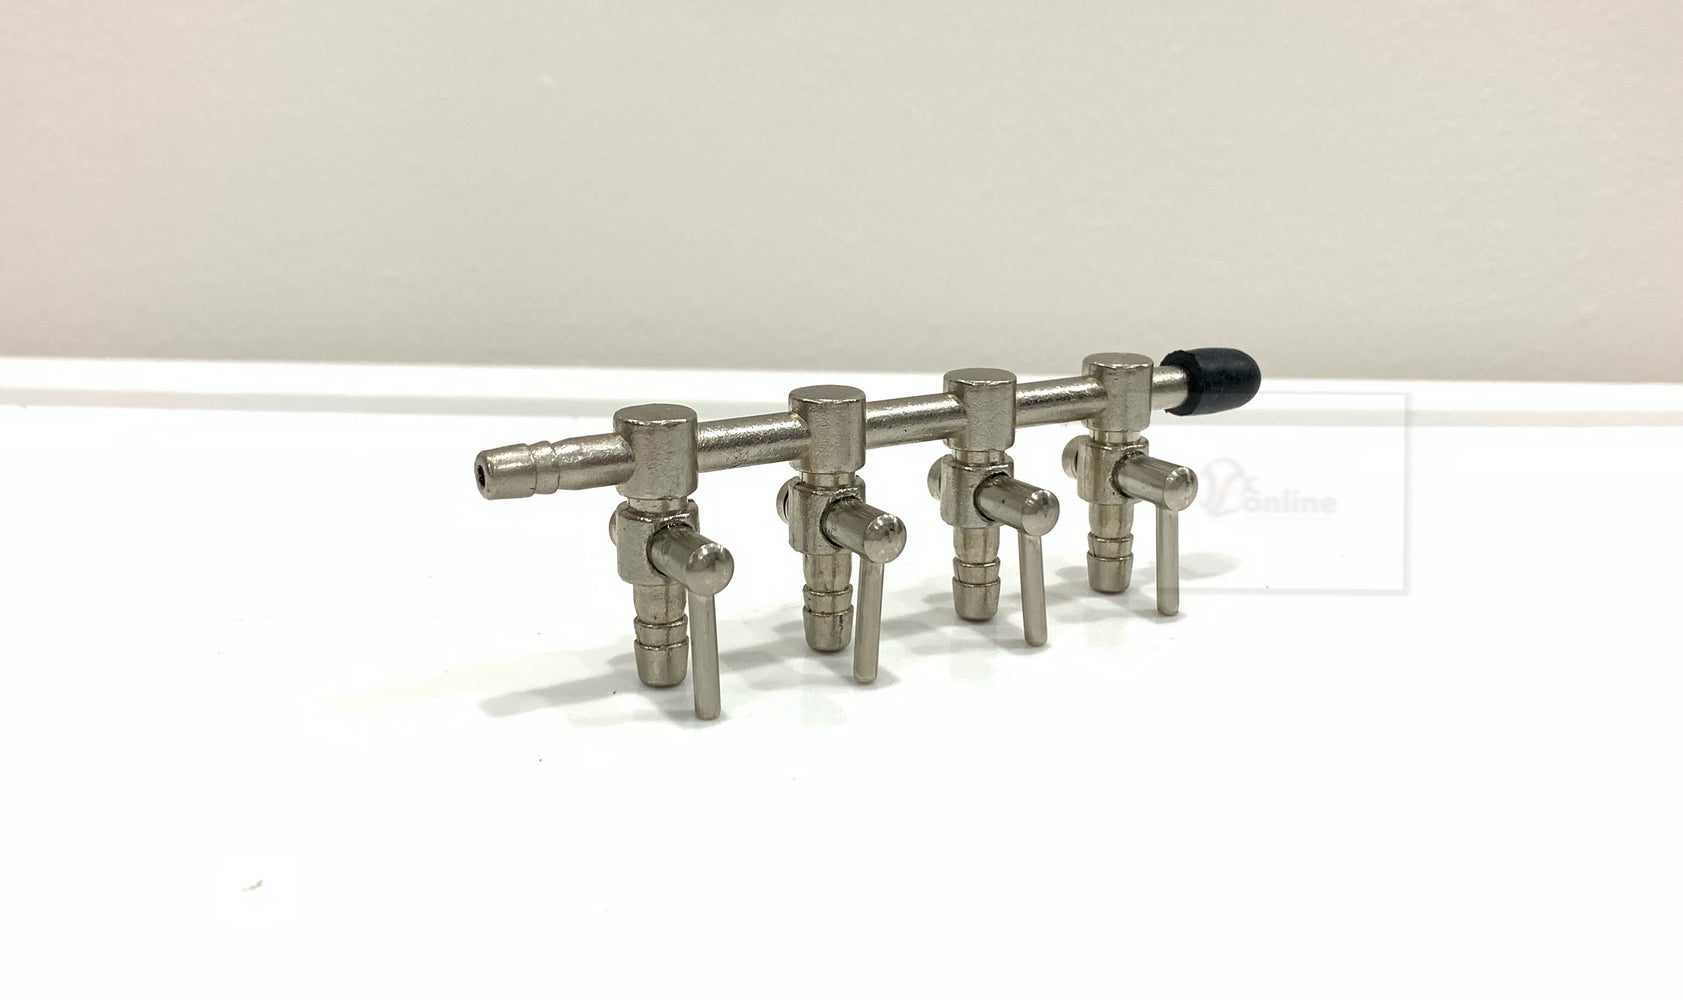 Air divider with control valve (4WG) - 4 way